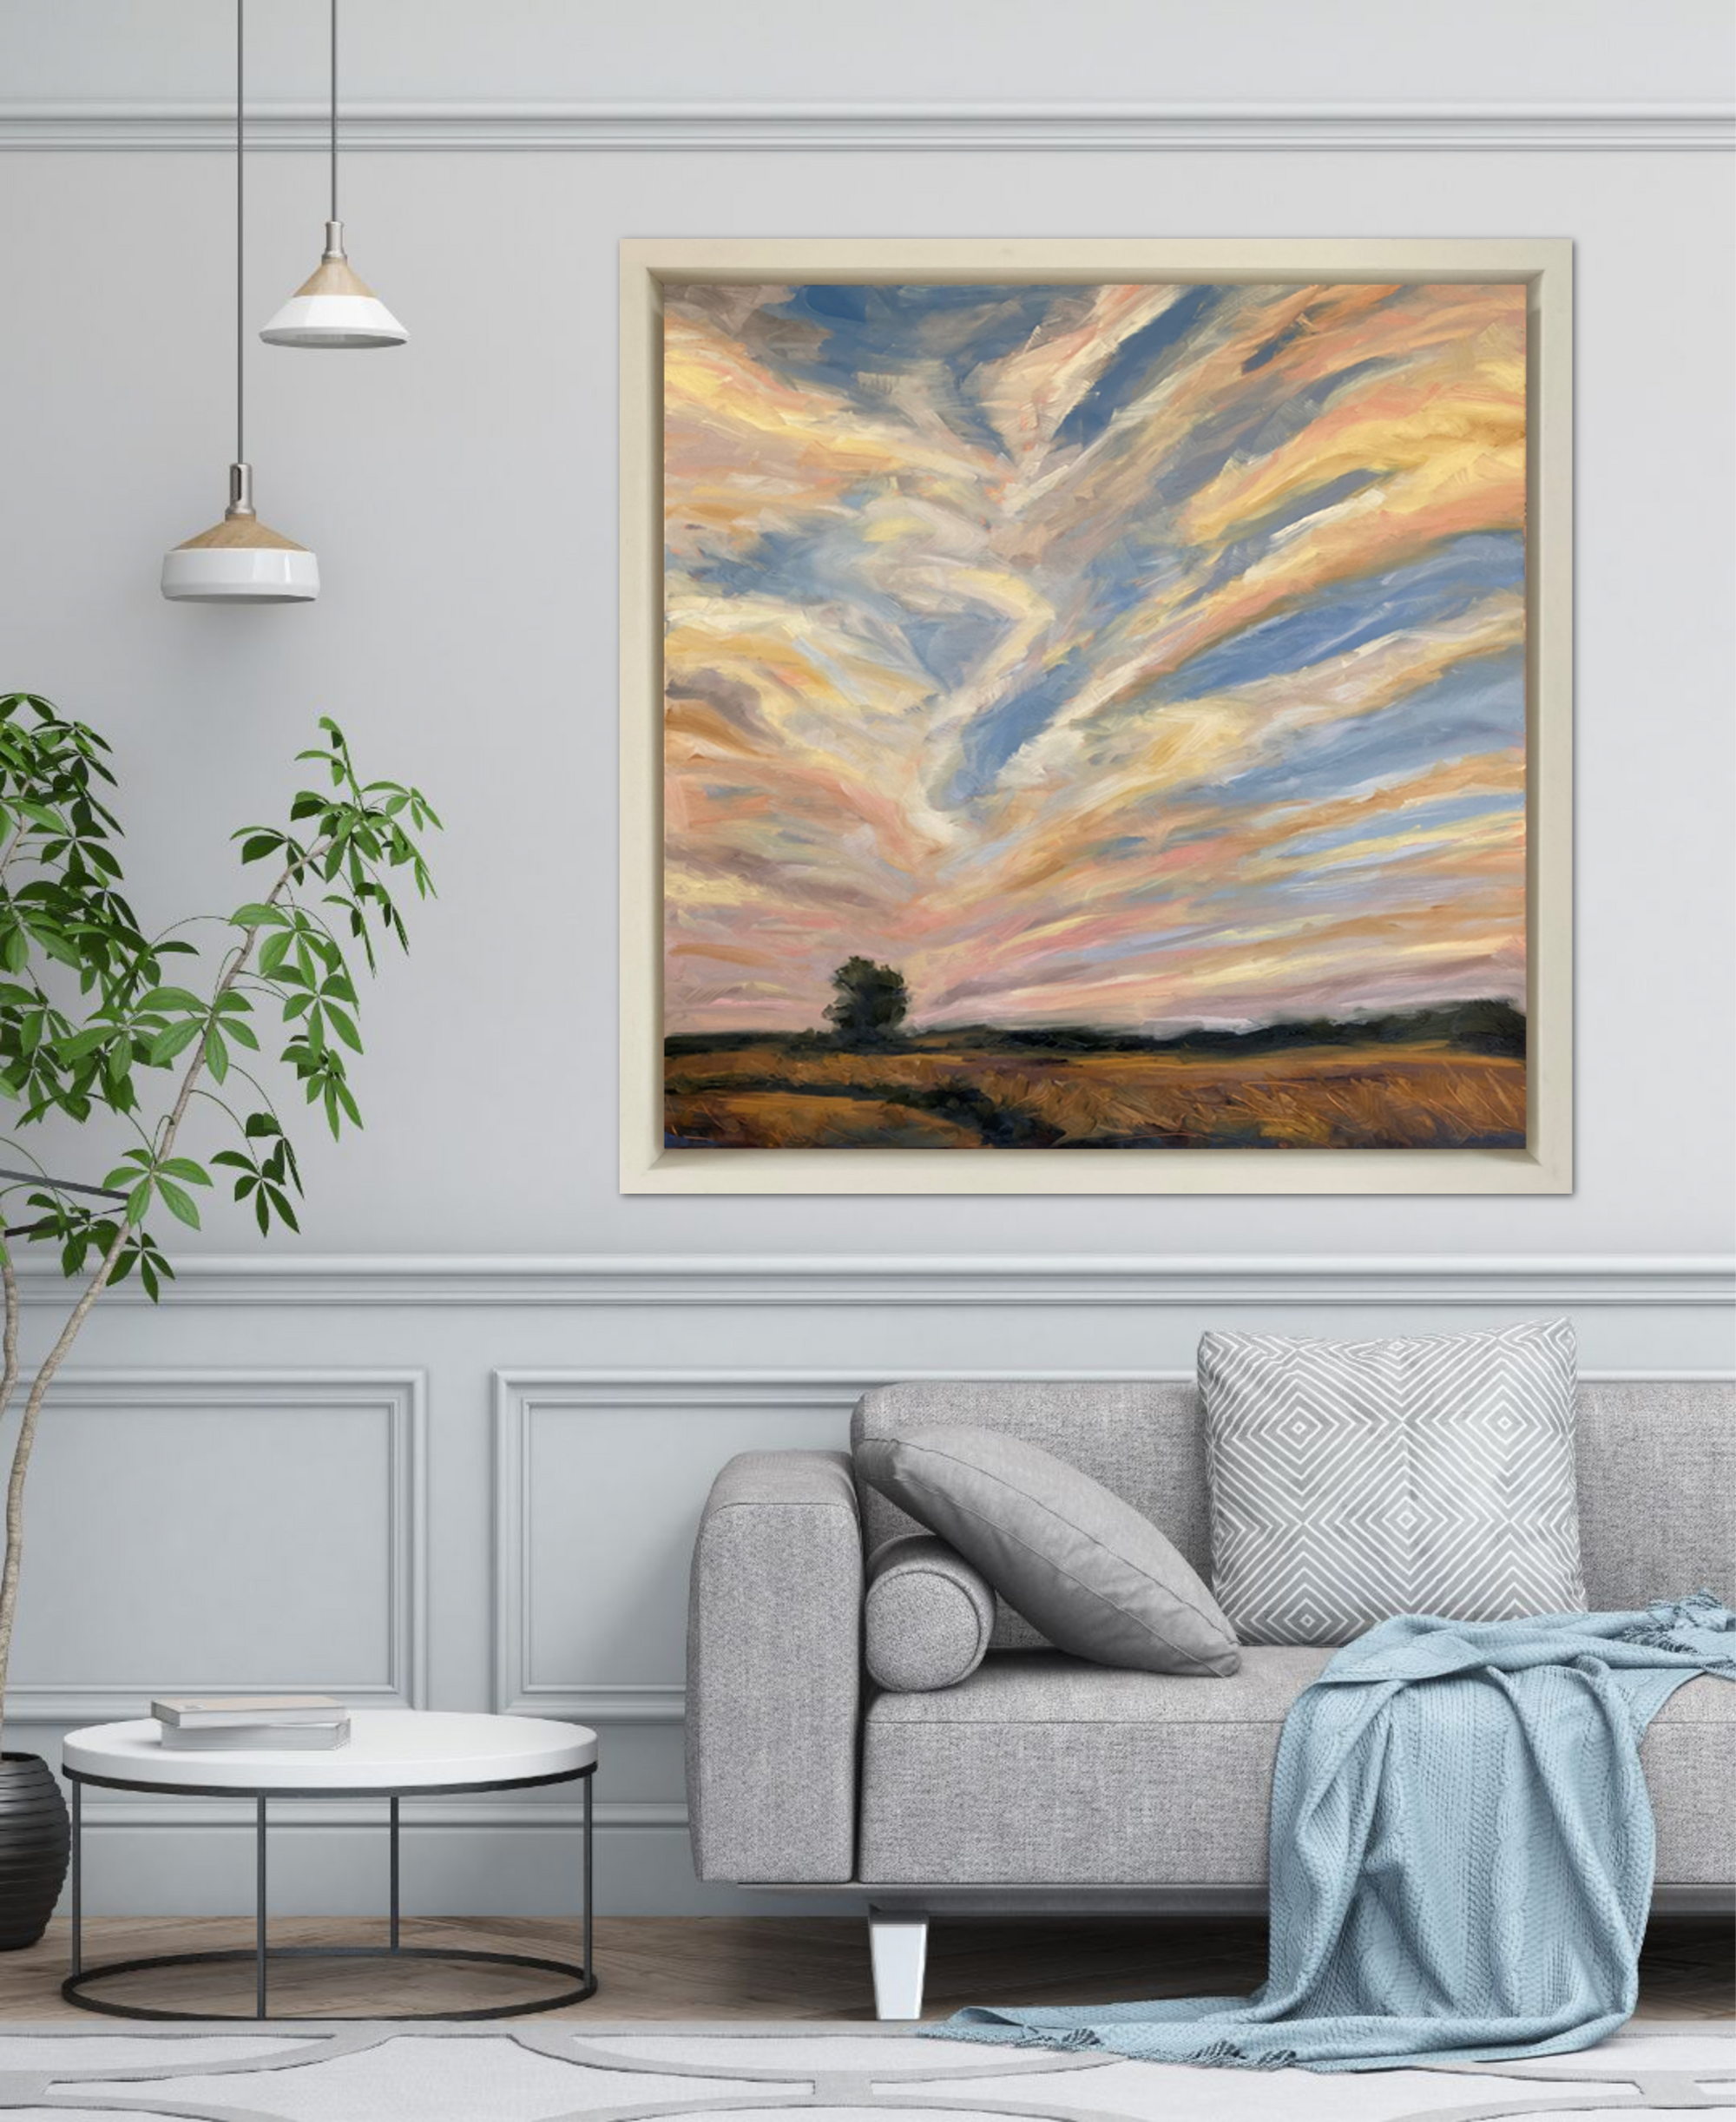 Dreaming Original Oil Landscape Painting In Room Setting 1